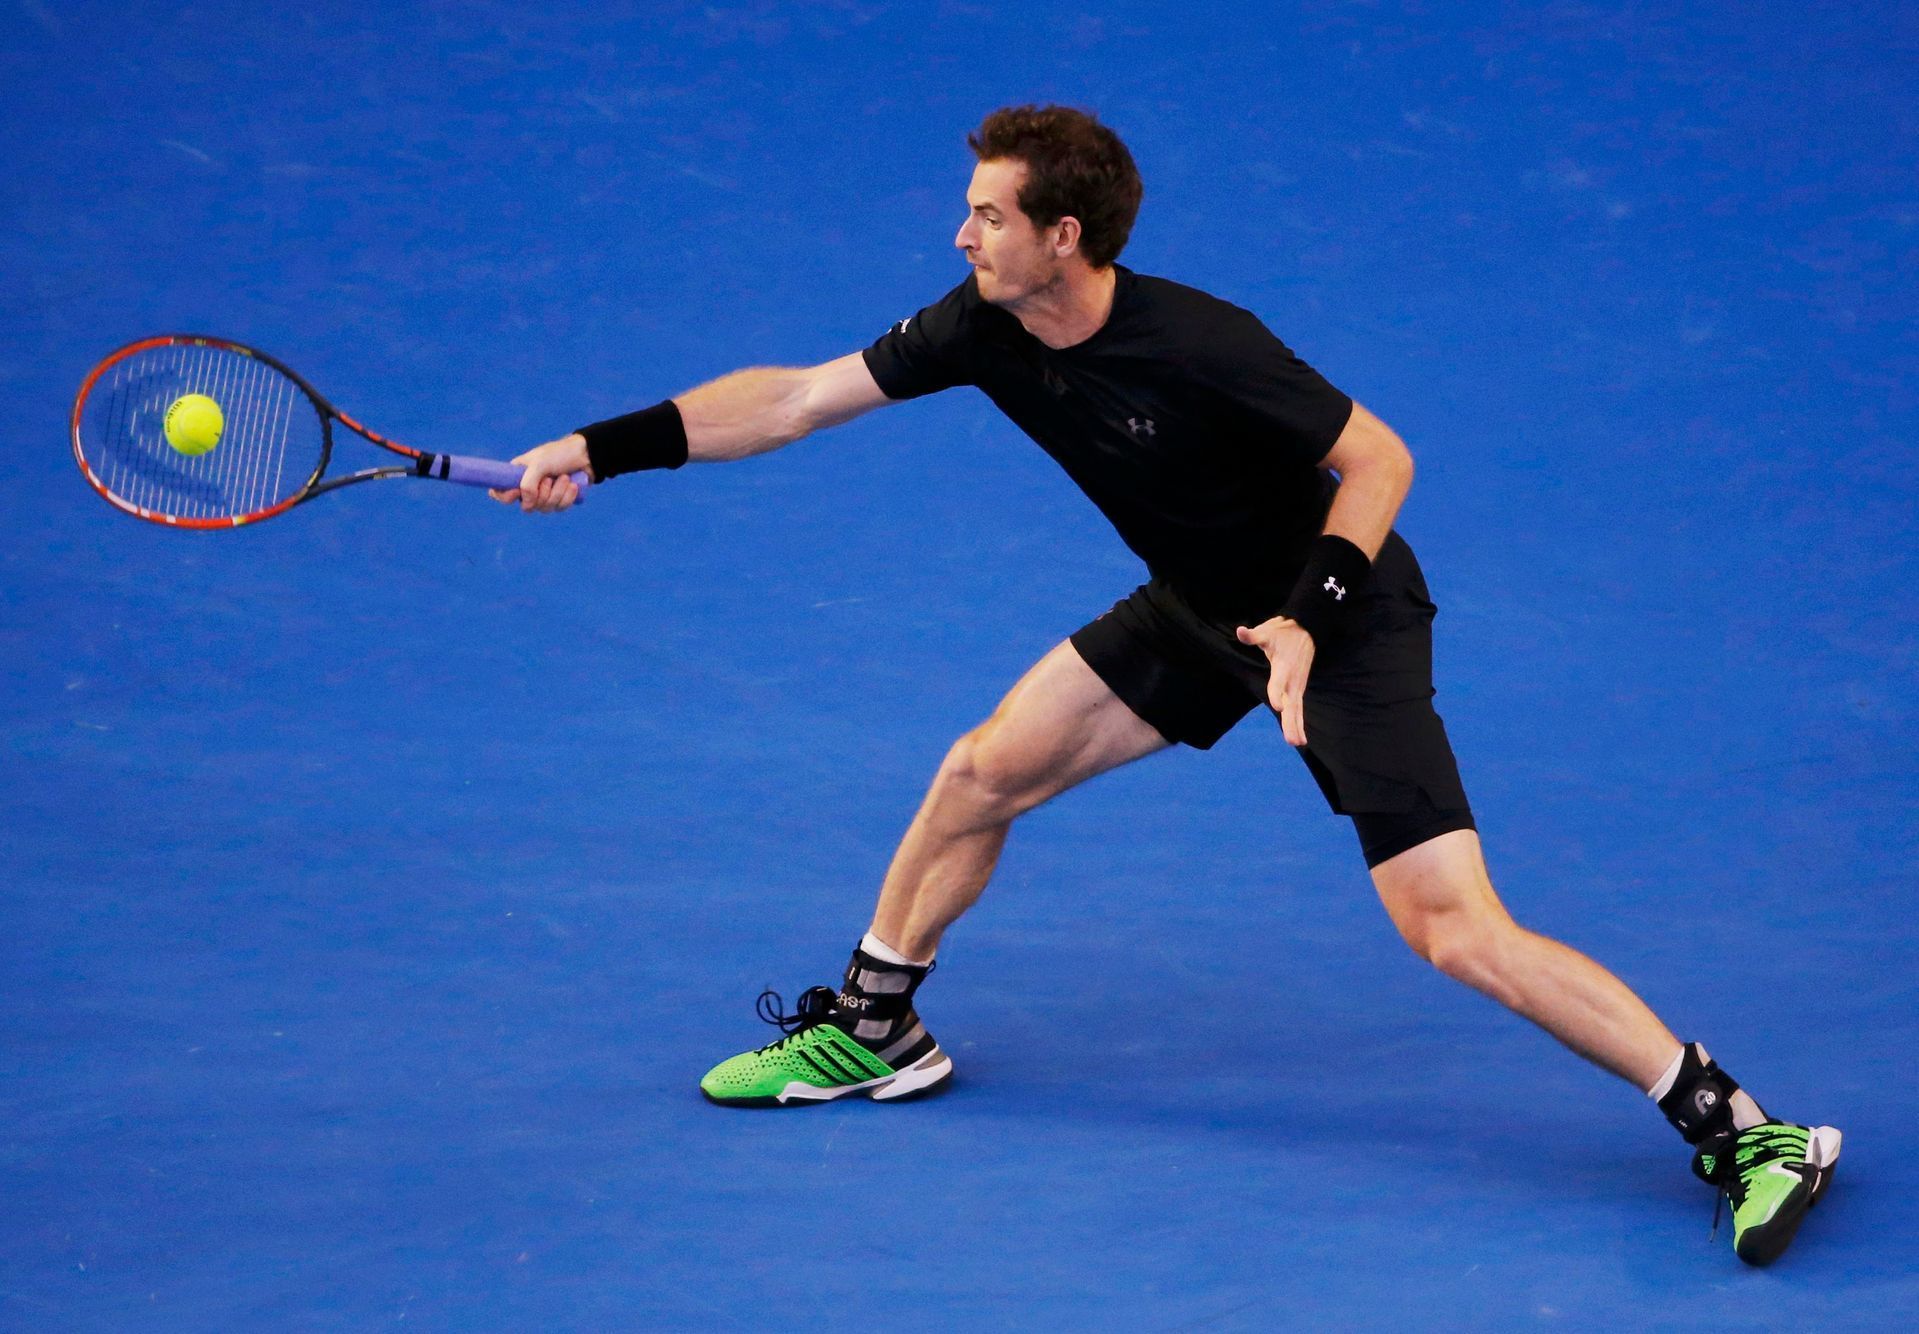 Andy Murray of Britain hits a return to Novak Djokovic of Serbia during their men's singles final match at the Australian Open 2015 tennis tournament in Melbourne